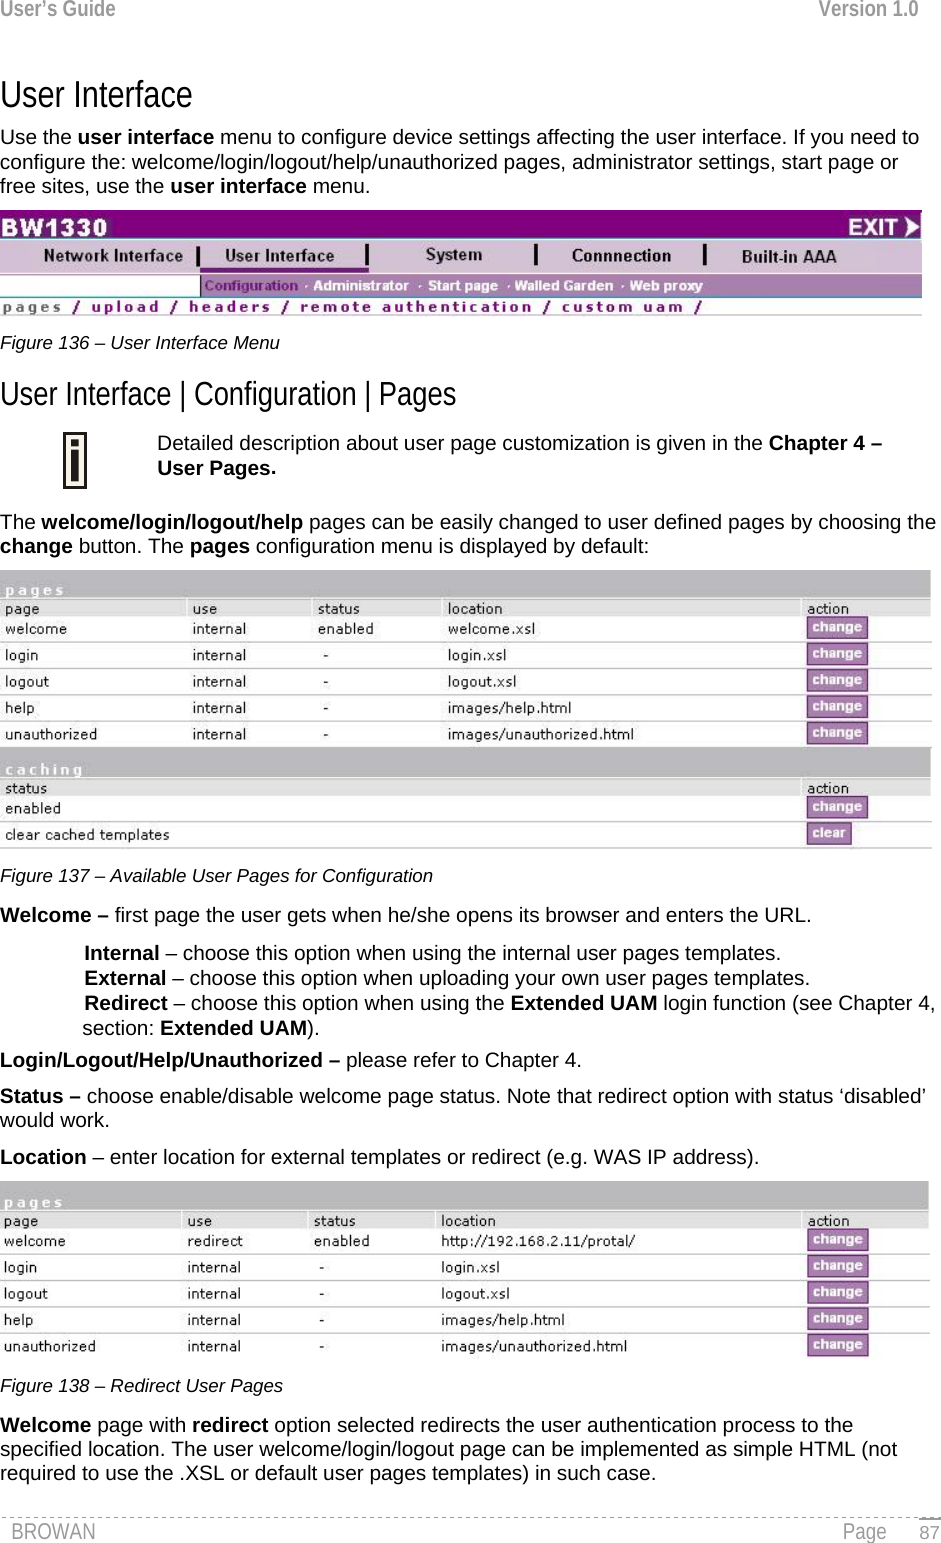 User’s Guide  Version 1.0  User Interface  Use the user interface menu to configure device settings affecting the user interface. If you need to configure the: welcome/login/logout/help/unauthorized pages, administrator settings, start page or free sites, use the user interface menu.  Figure 136 – User Interface Menu User Interface | Configuration | Pages Detailed description about user page customization is given in the Chapter 4 – User Pages.  The welcome/login/logout/help pages can be easily changed to user defined pages by choosing the change button. The pages configuration menu is displayed by default:  Figure 137 – Available User Pages for Configuration Welcome – first page the user gets when he/she opens its browser and enters the URL. Internal – choose this option when using the internal user pages templates. External – choose this option when uploading your own user pages templates. Redirect – choose this option when using the Extended UAM login function (see Chapter 4, section: Extended UAM). Login/Logout/Help/Unauthorized – please refer to Chapter 4.  Status – choose enable/disable welcome page status. Note that redirect option with status ‘disabled’ would work. Location – enter location for external templates or redirect (e.g. WAS IP address).  Figure 138 – Redirect User Pages  Welcome page with redirect option selected redirects the user authentication process to the specified location. The user welcome/login/logout page can be implemented as simple HTML (not required to use the .XSL or default user pages templates) in such case. BROWAN                                                                                                                                               Page   87